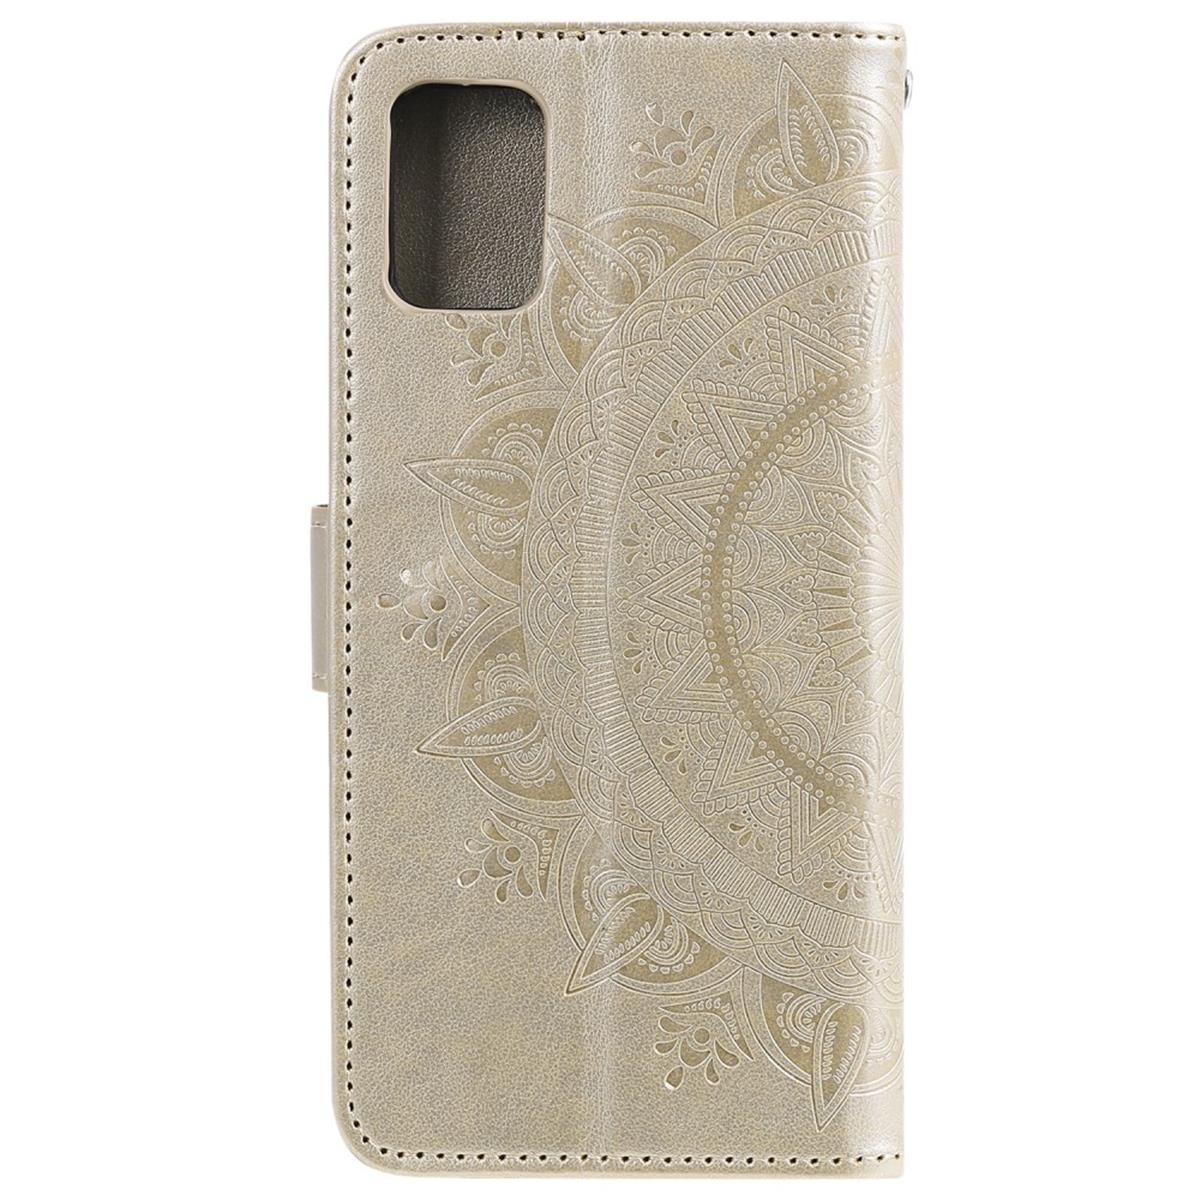 COVERKINGZ Klapphülle Samsung, Mandala A31, Gold Muster, Galaxy Bookcover, mit